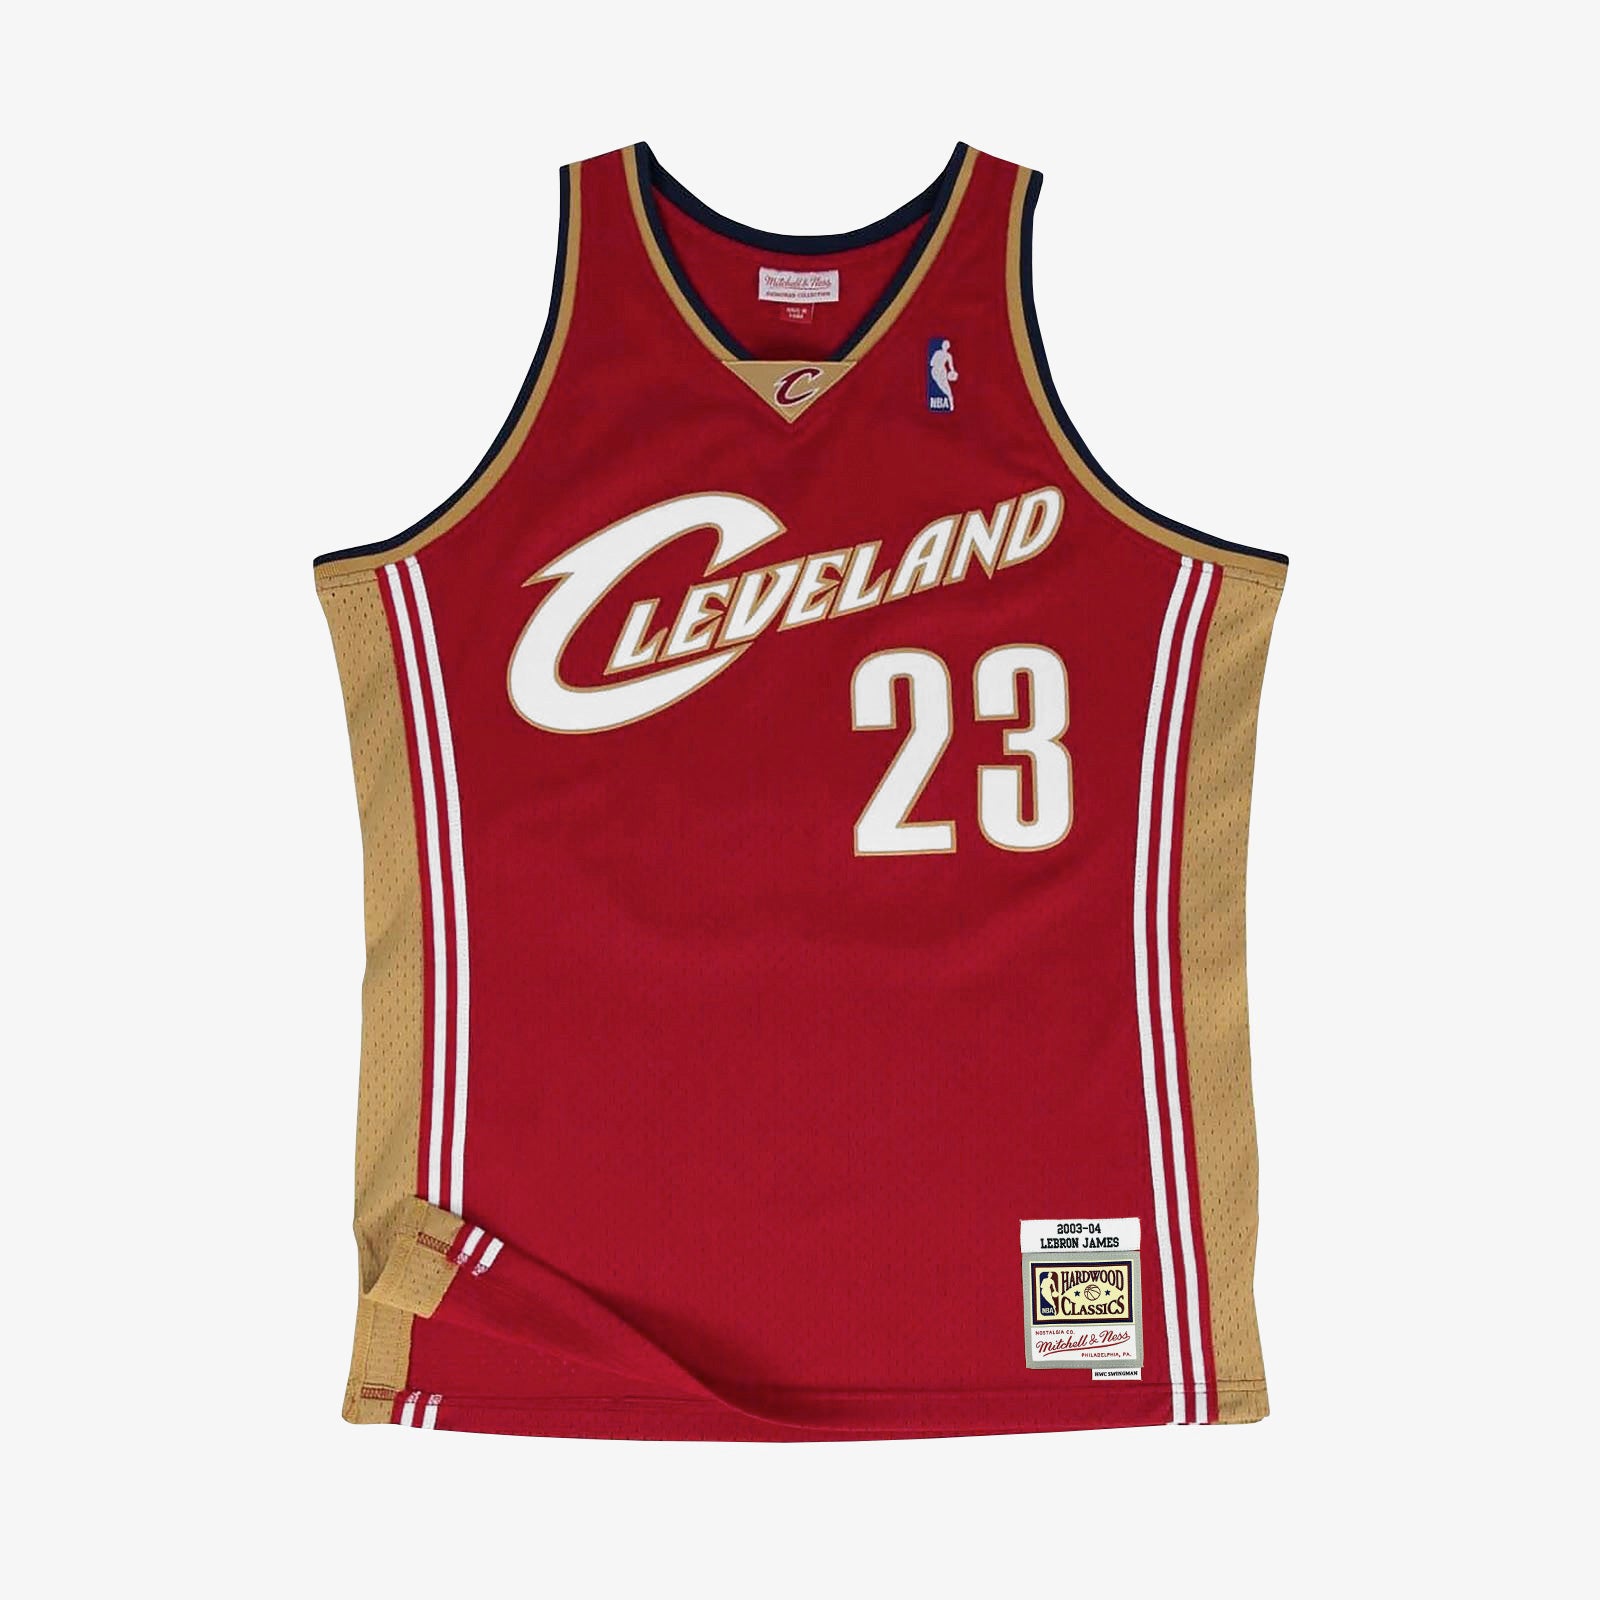 LeBron James to play in the number 23 jersey for the Cleveland